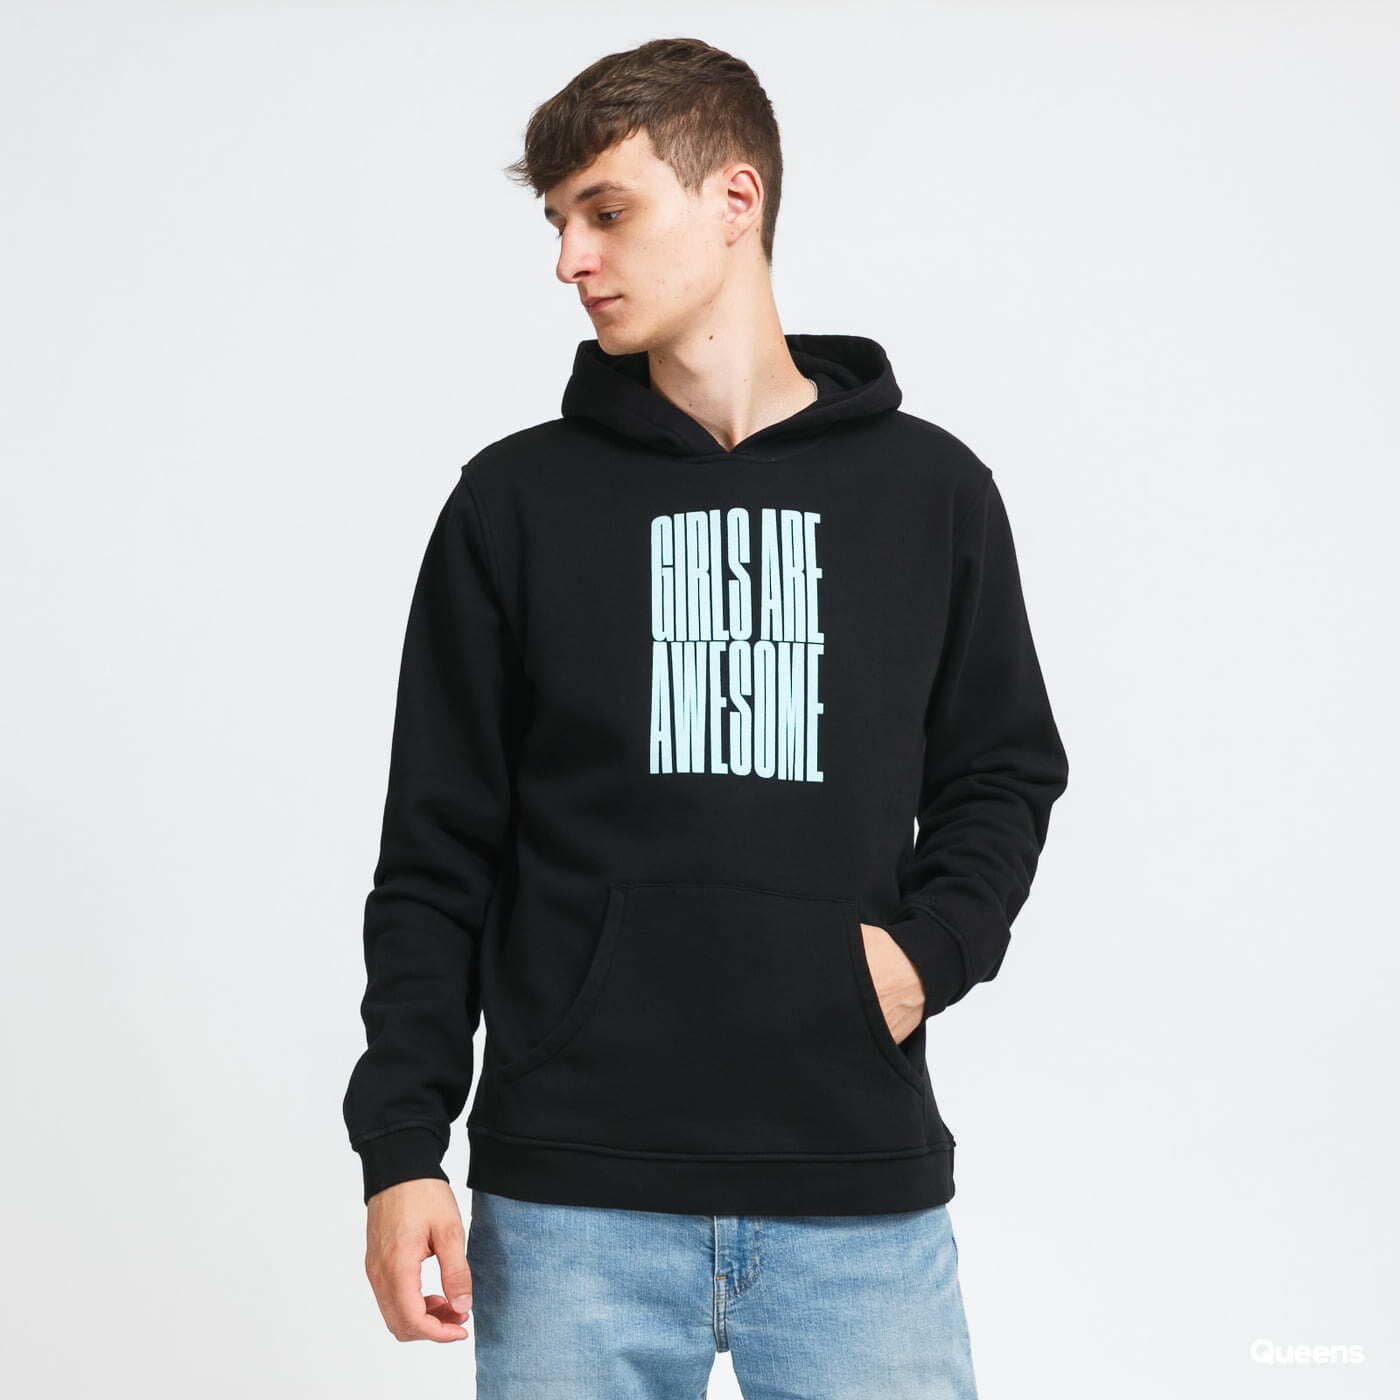 Stand Tall Hoody